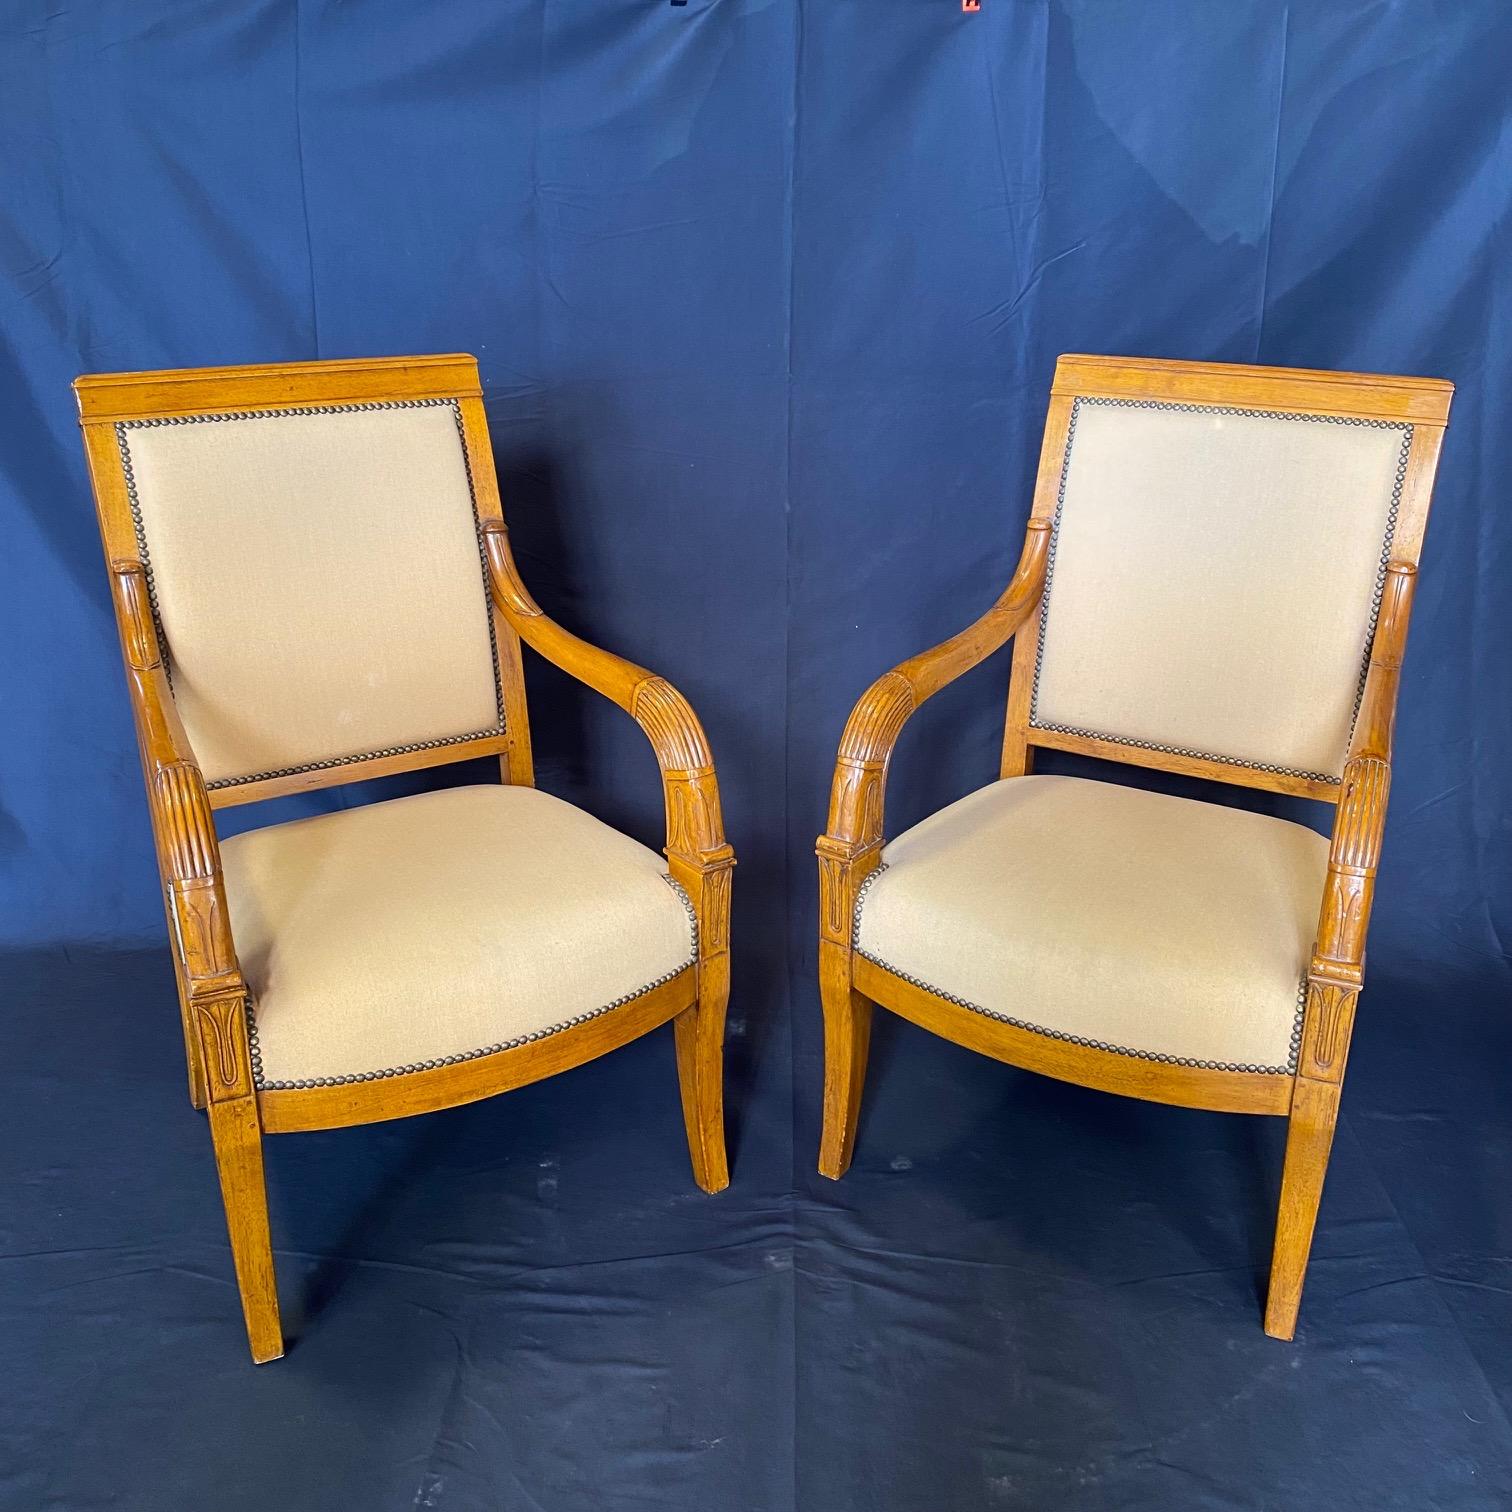 This set of two elegant Empire arm chairs stand out for their classic simple design and the beautifully shaped front legs. These comfortable and stylish chairs feature a wealth of fine craftsmanship, including classic moulding detailing on the